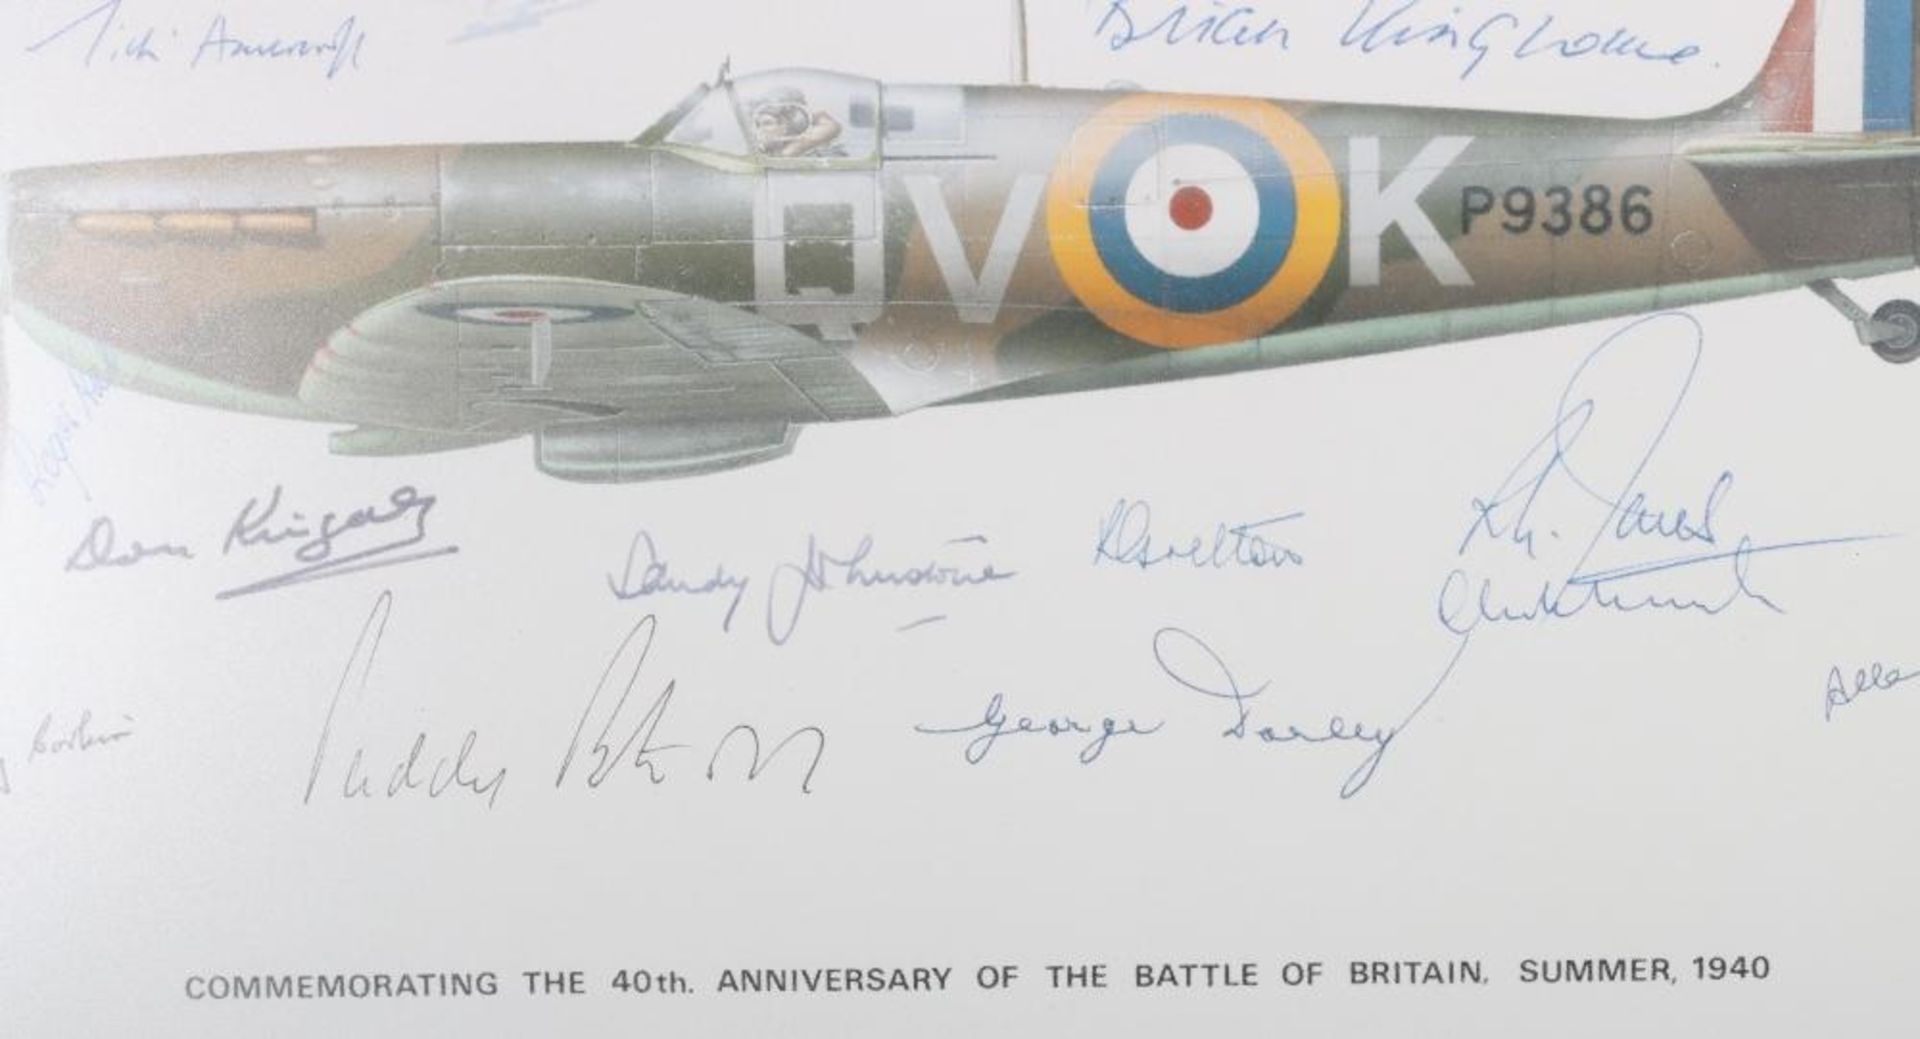 RAF 40th Anniversary of the Battle of Britain Print by Keith Bloomfield - Image 5 of 5